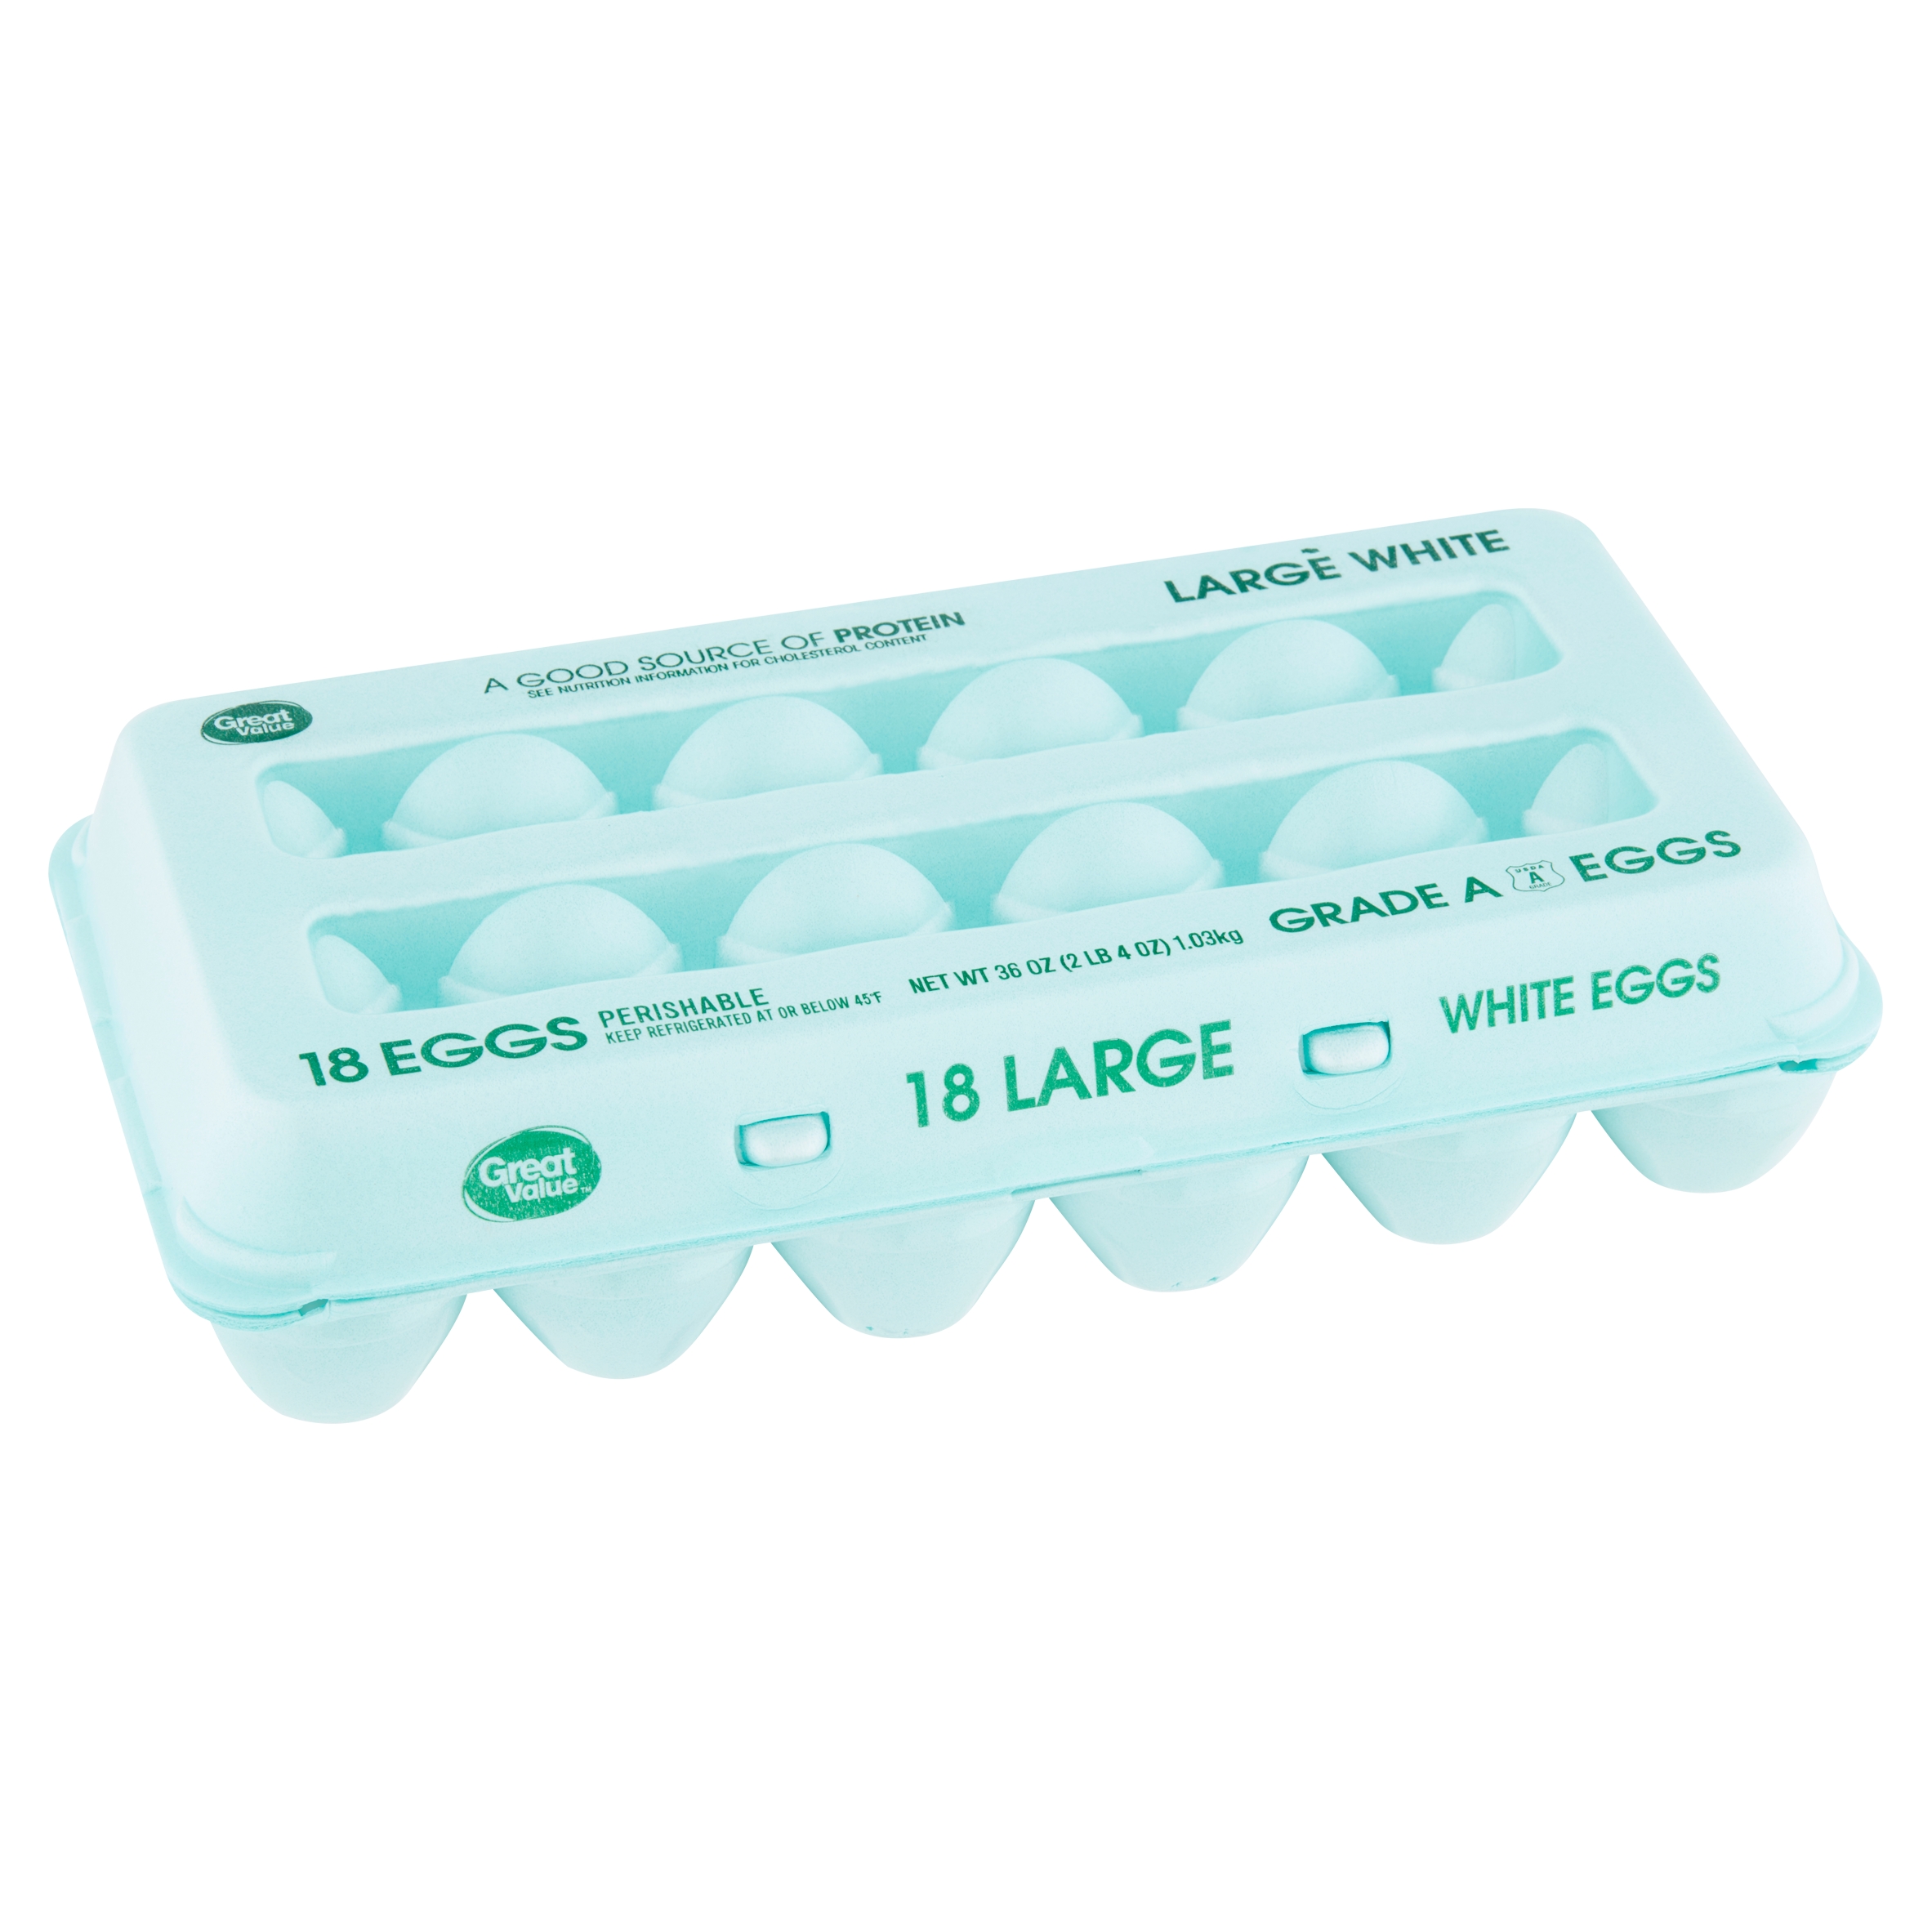 Great Value Large White Eggs, 18 Count, 36 Oz